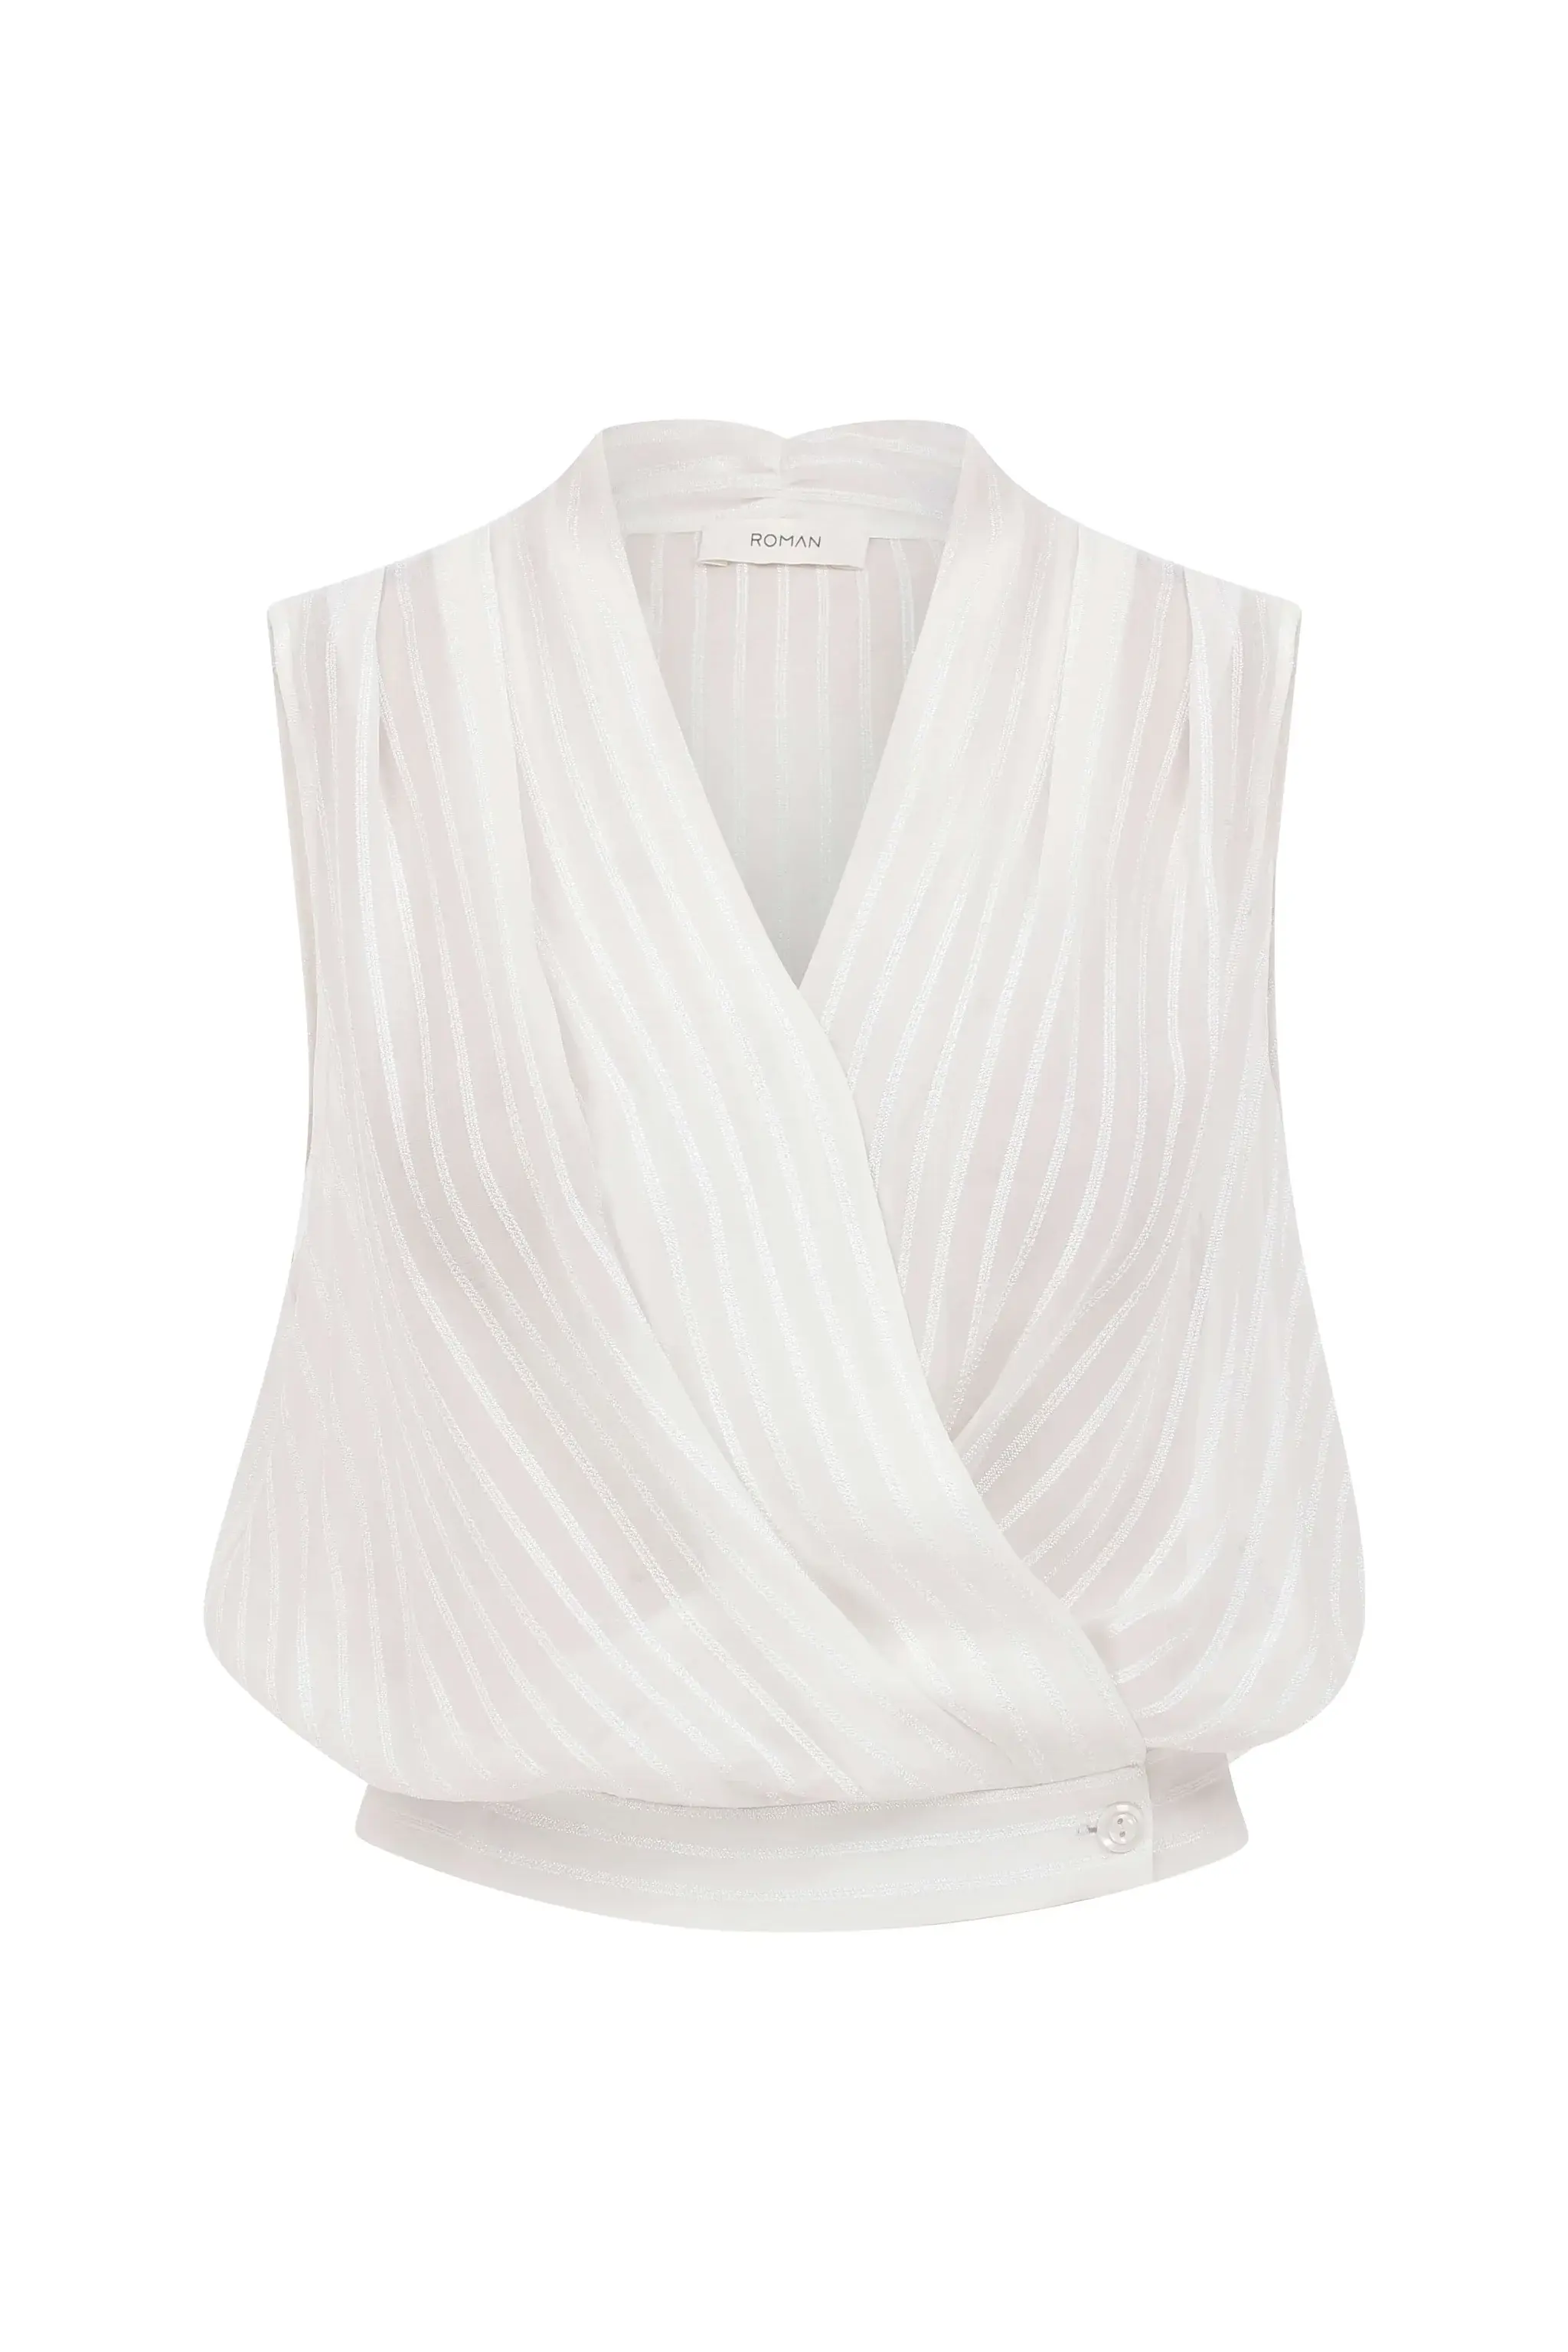 Roman Sheer Striped Double Breasted White Blouse - 4 / White. 1